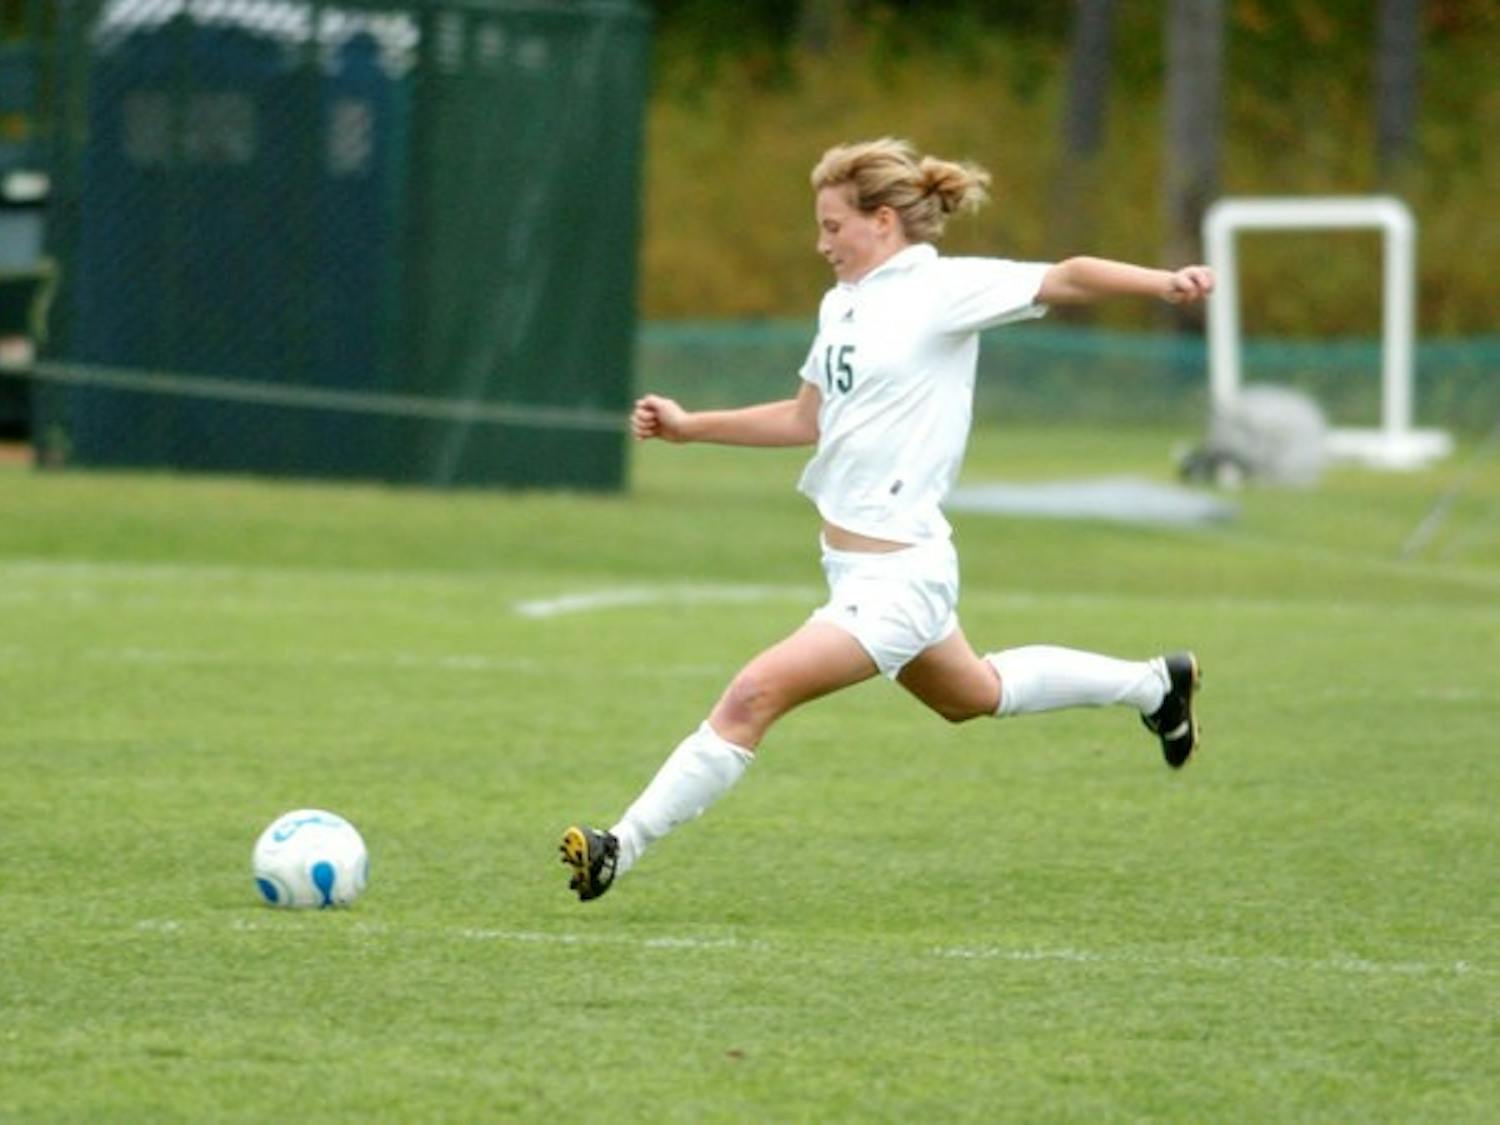 Annie Stanley '08 was named first-team All-Ivy after putting forth a tremendous defensive effort this season.